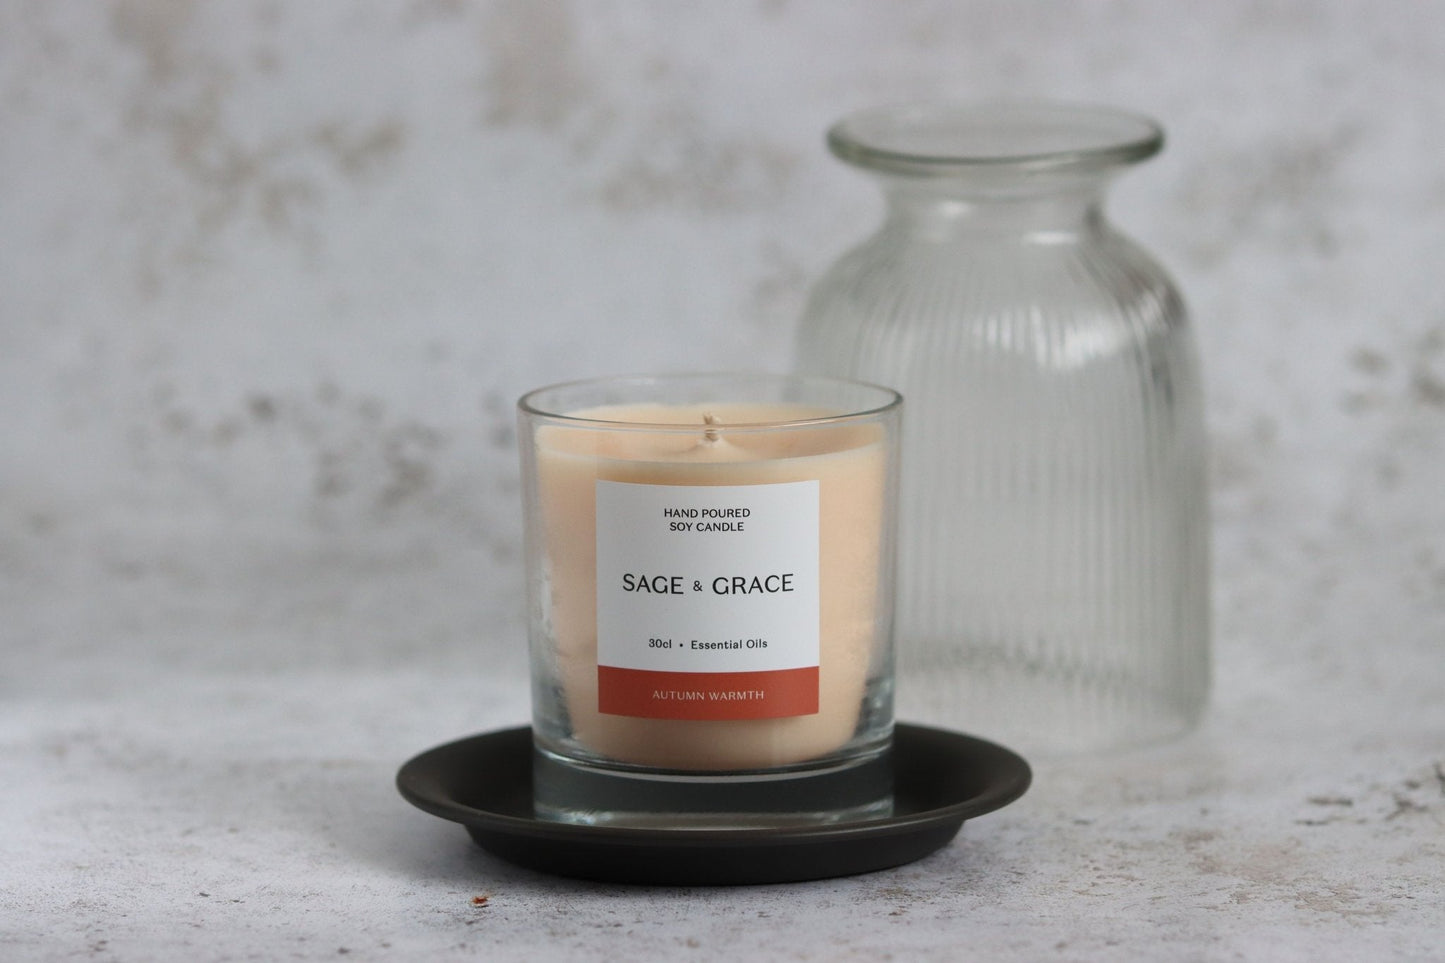 Autumn Warmth - Essential Oil Candle